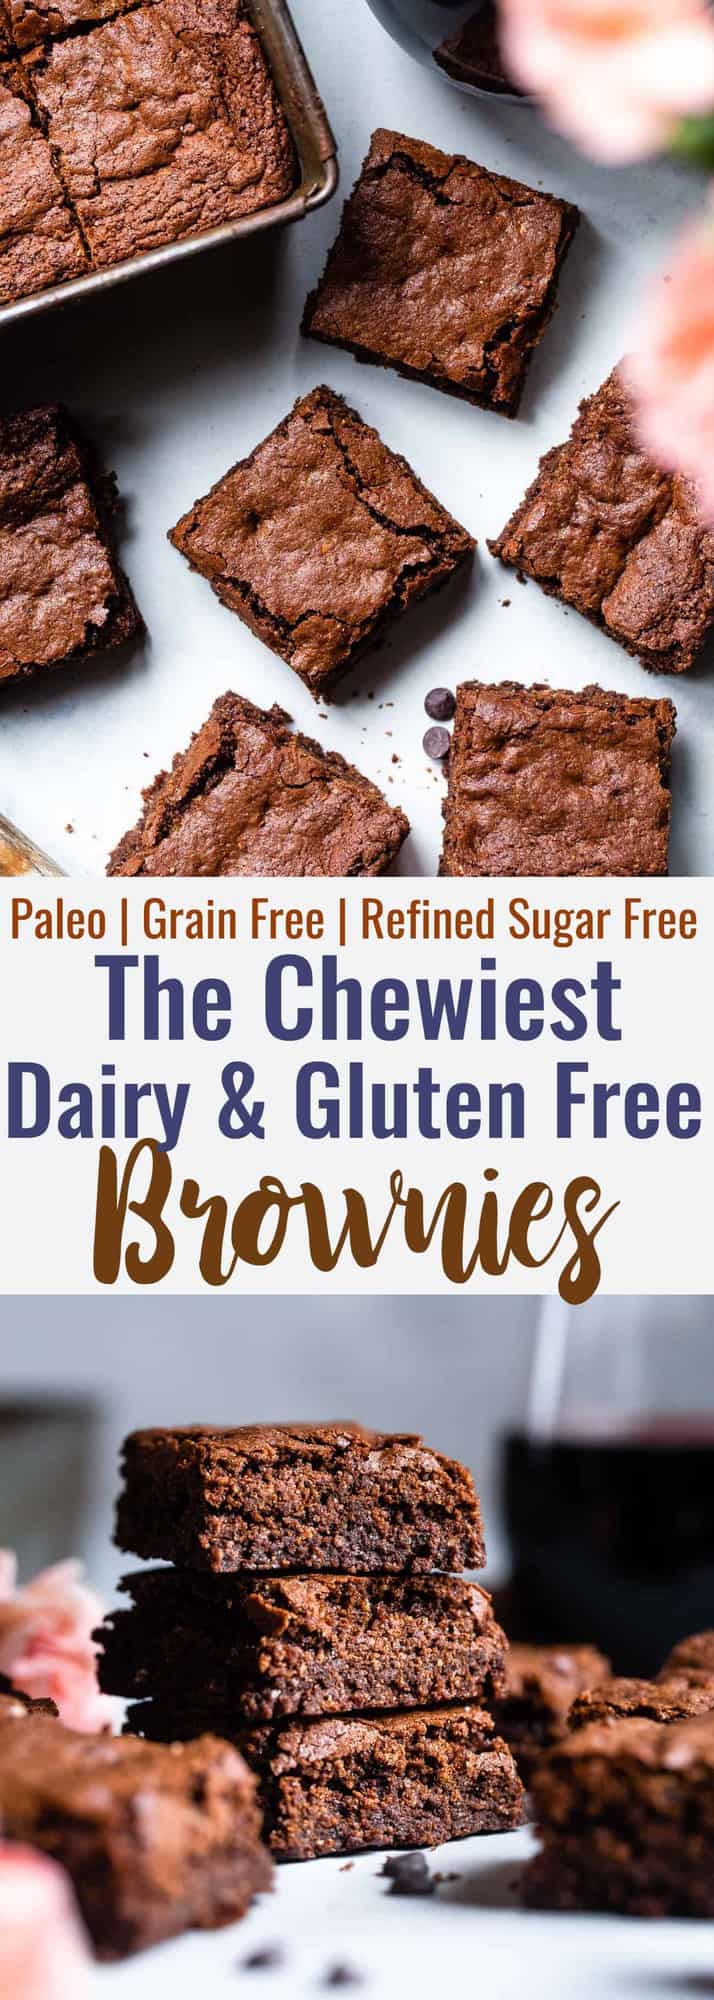 Easy Gluten Free Dairy Free Brownies - These grain free, healthy brownies come together in less than an hour and are SO dense, chewy and FUDGY! Paleo friendly, gluten and dairy free and SO delicious! | #Foodfaithfitness | 